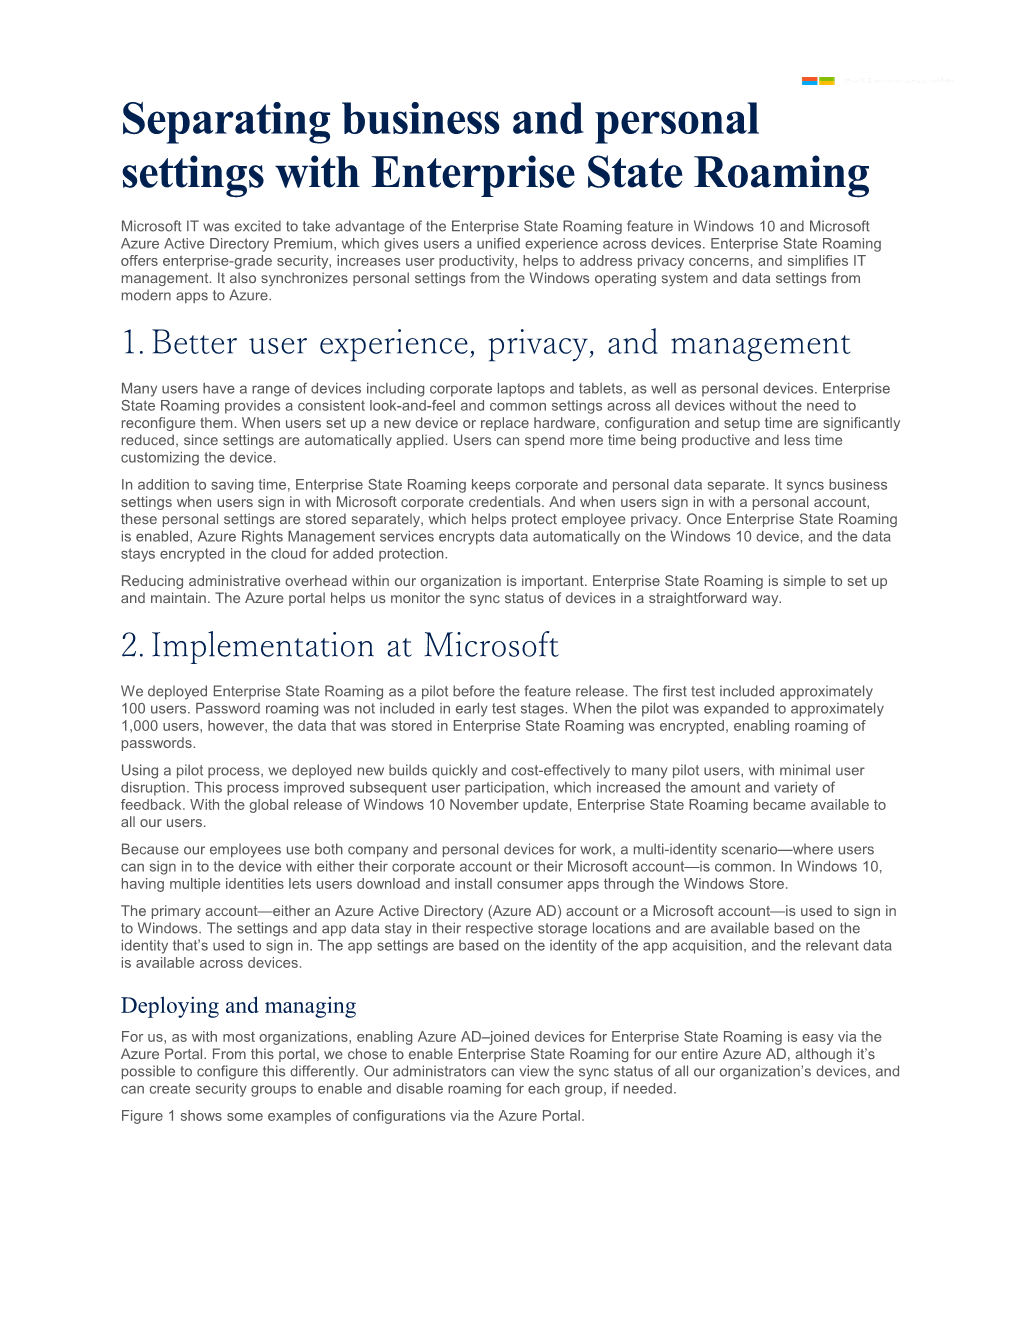 Separating Business and Personal Settings with Enterprise State Roaming